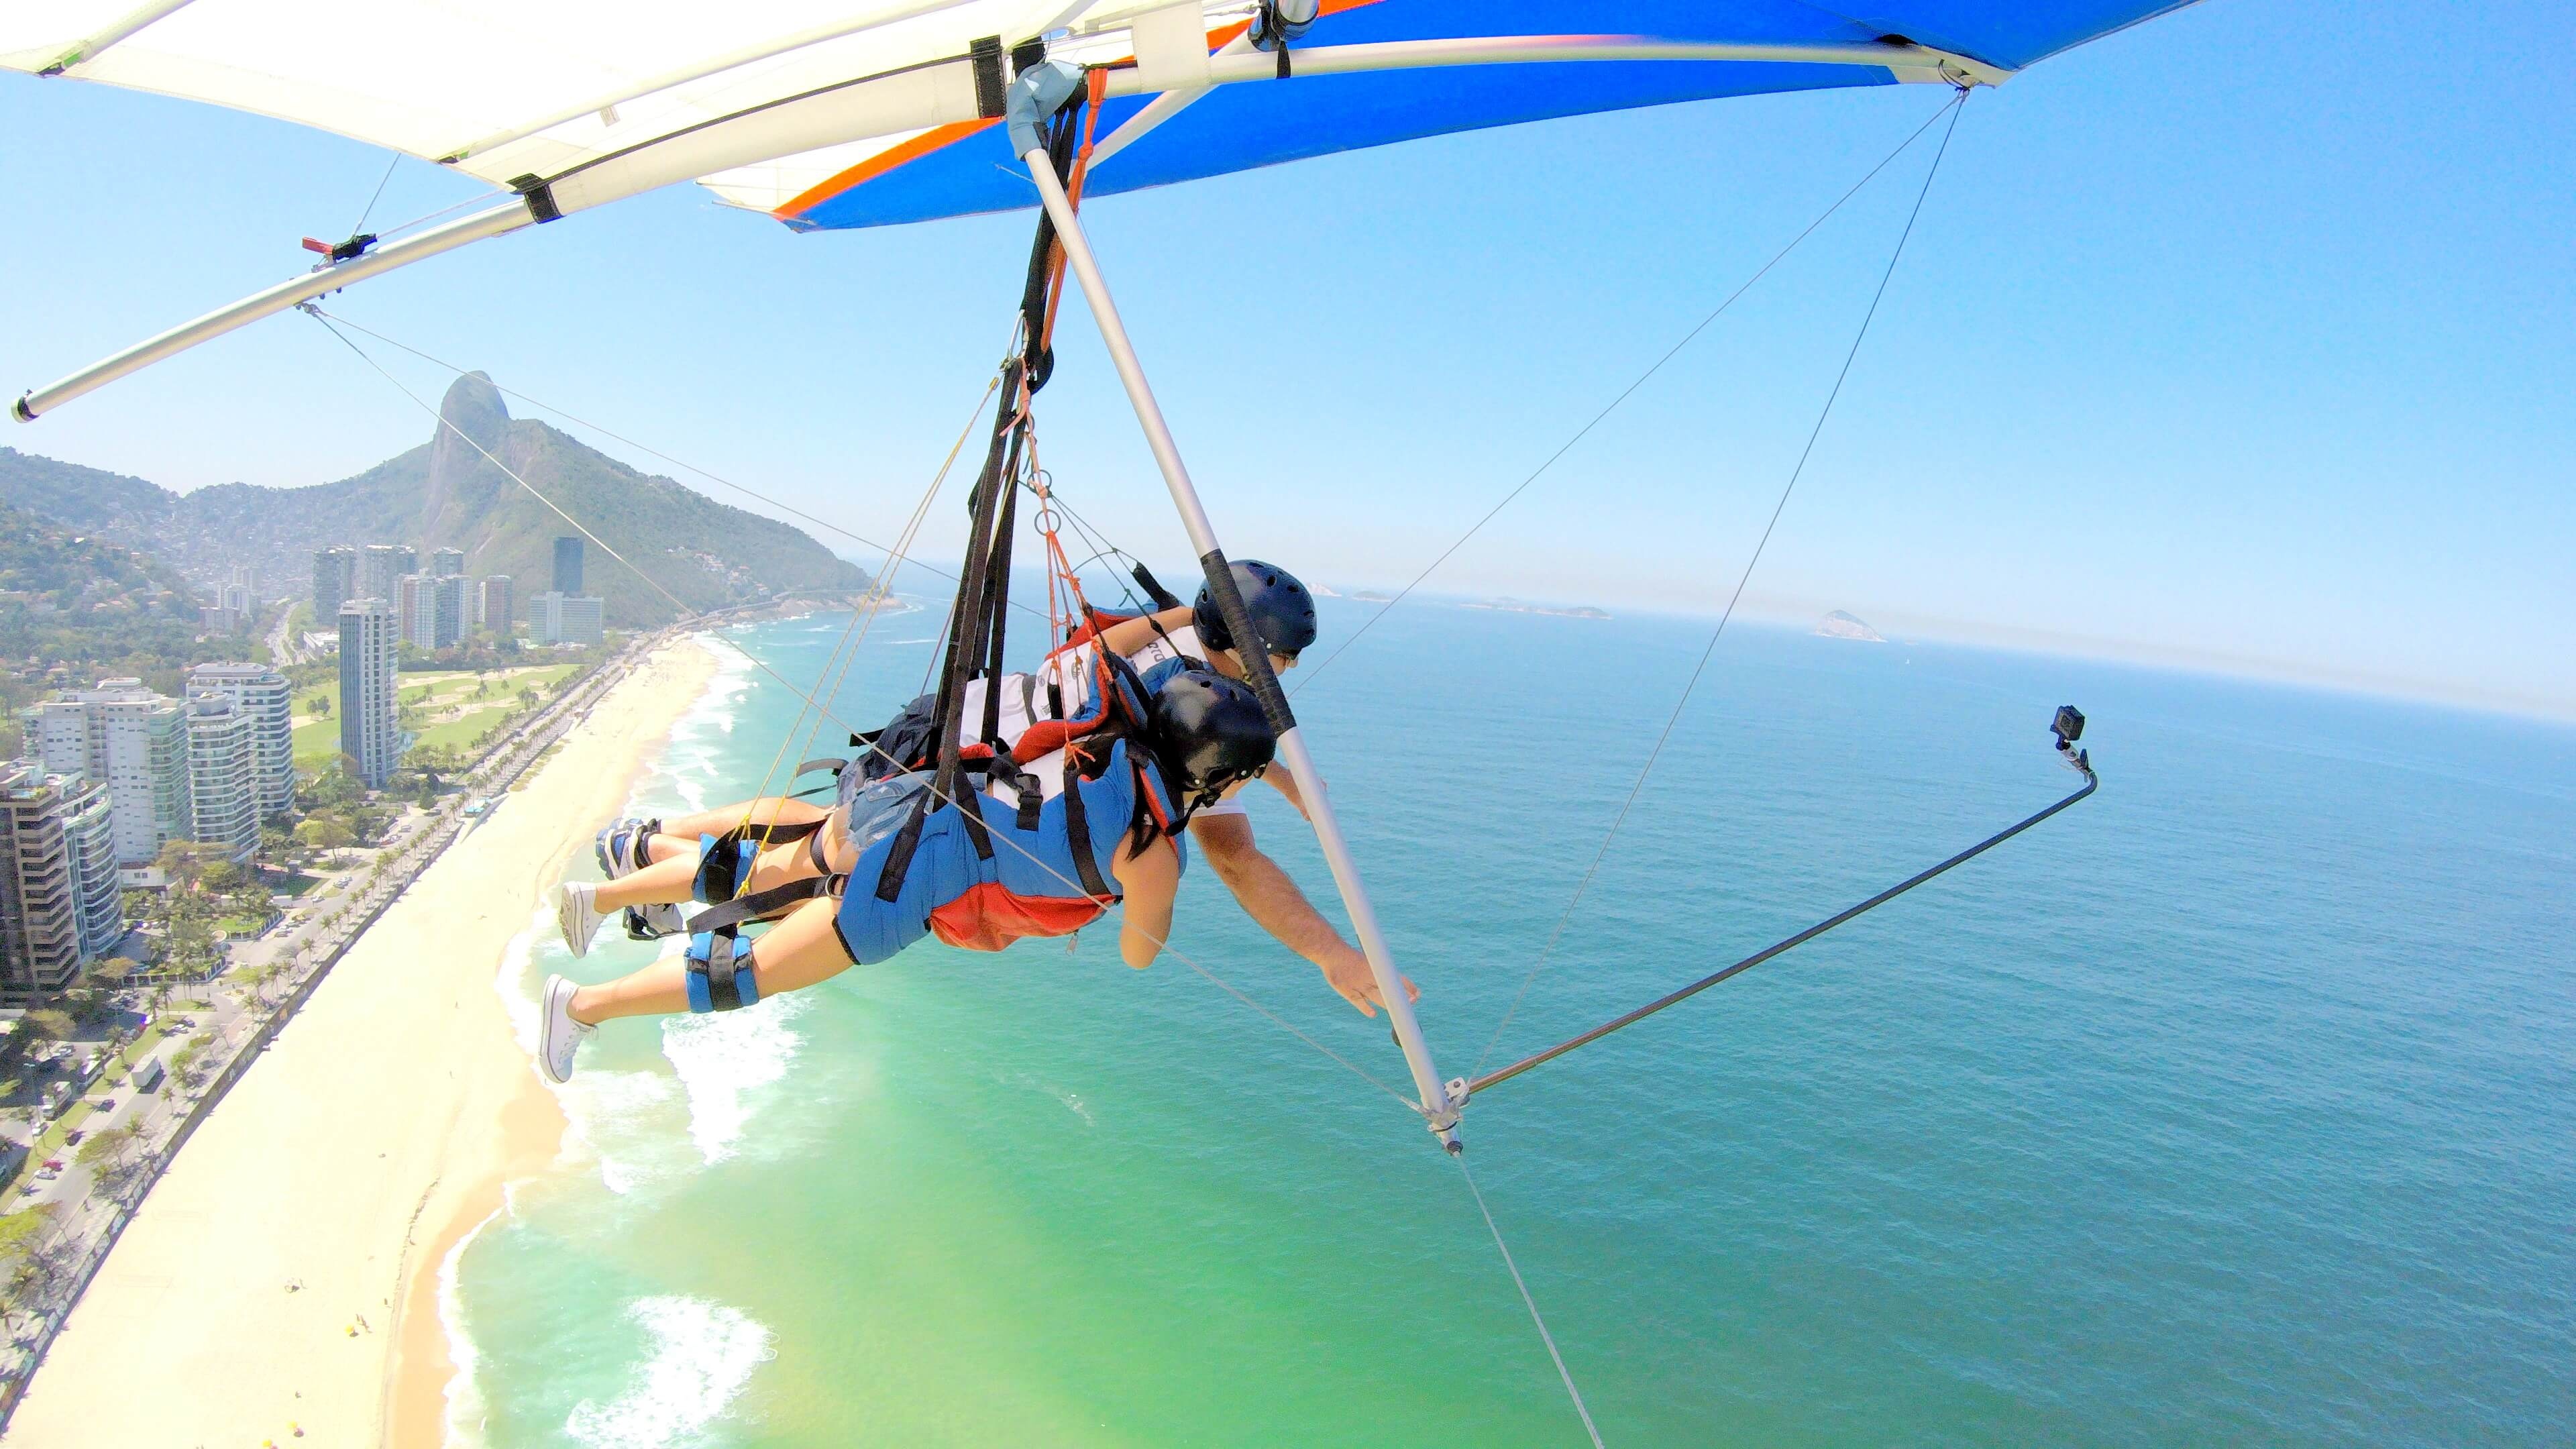 Air Sports: Gliding over the sea and taking selfies at altitude, Windsports. 3840x2160 4K Wallpaper.